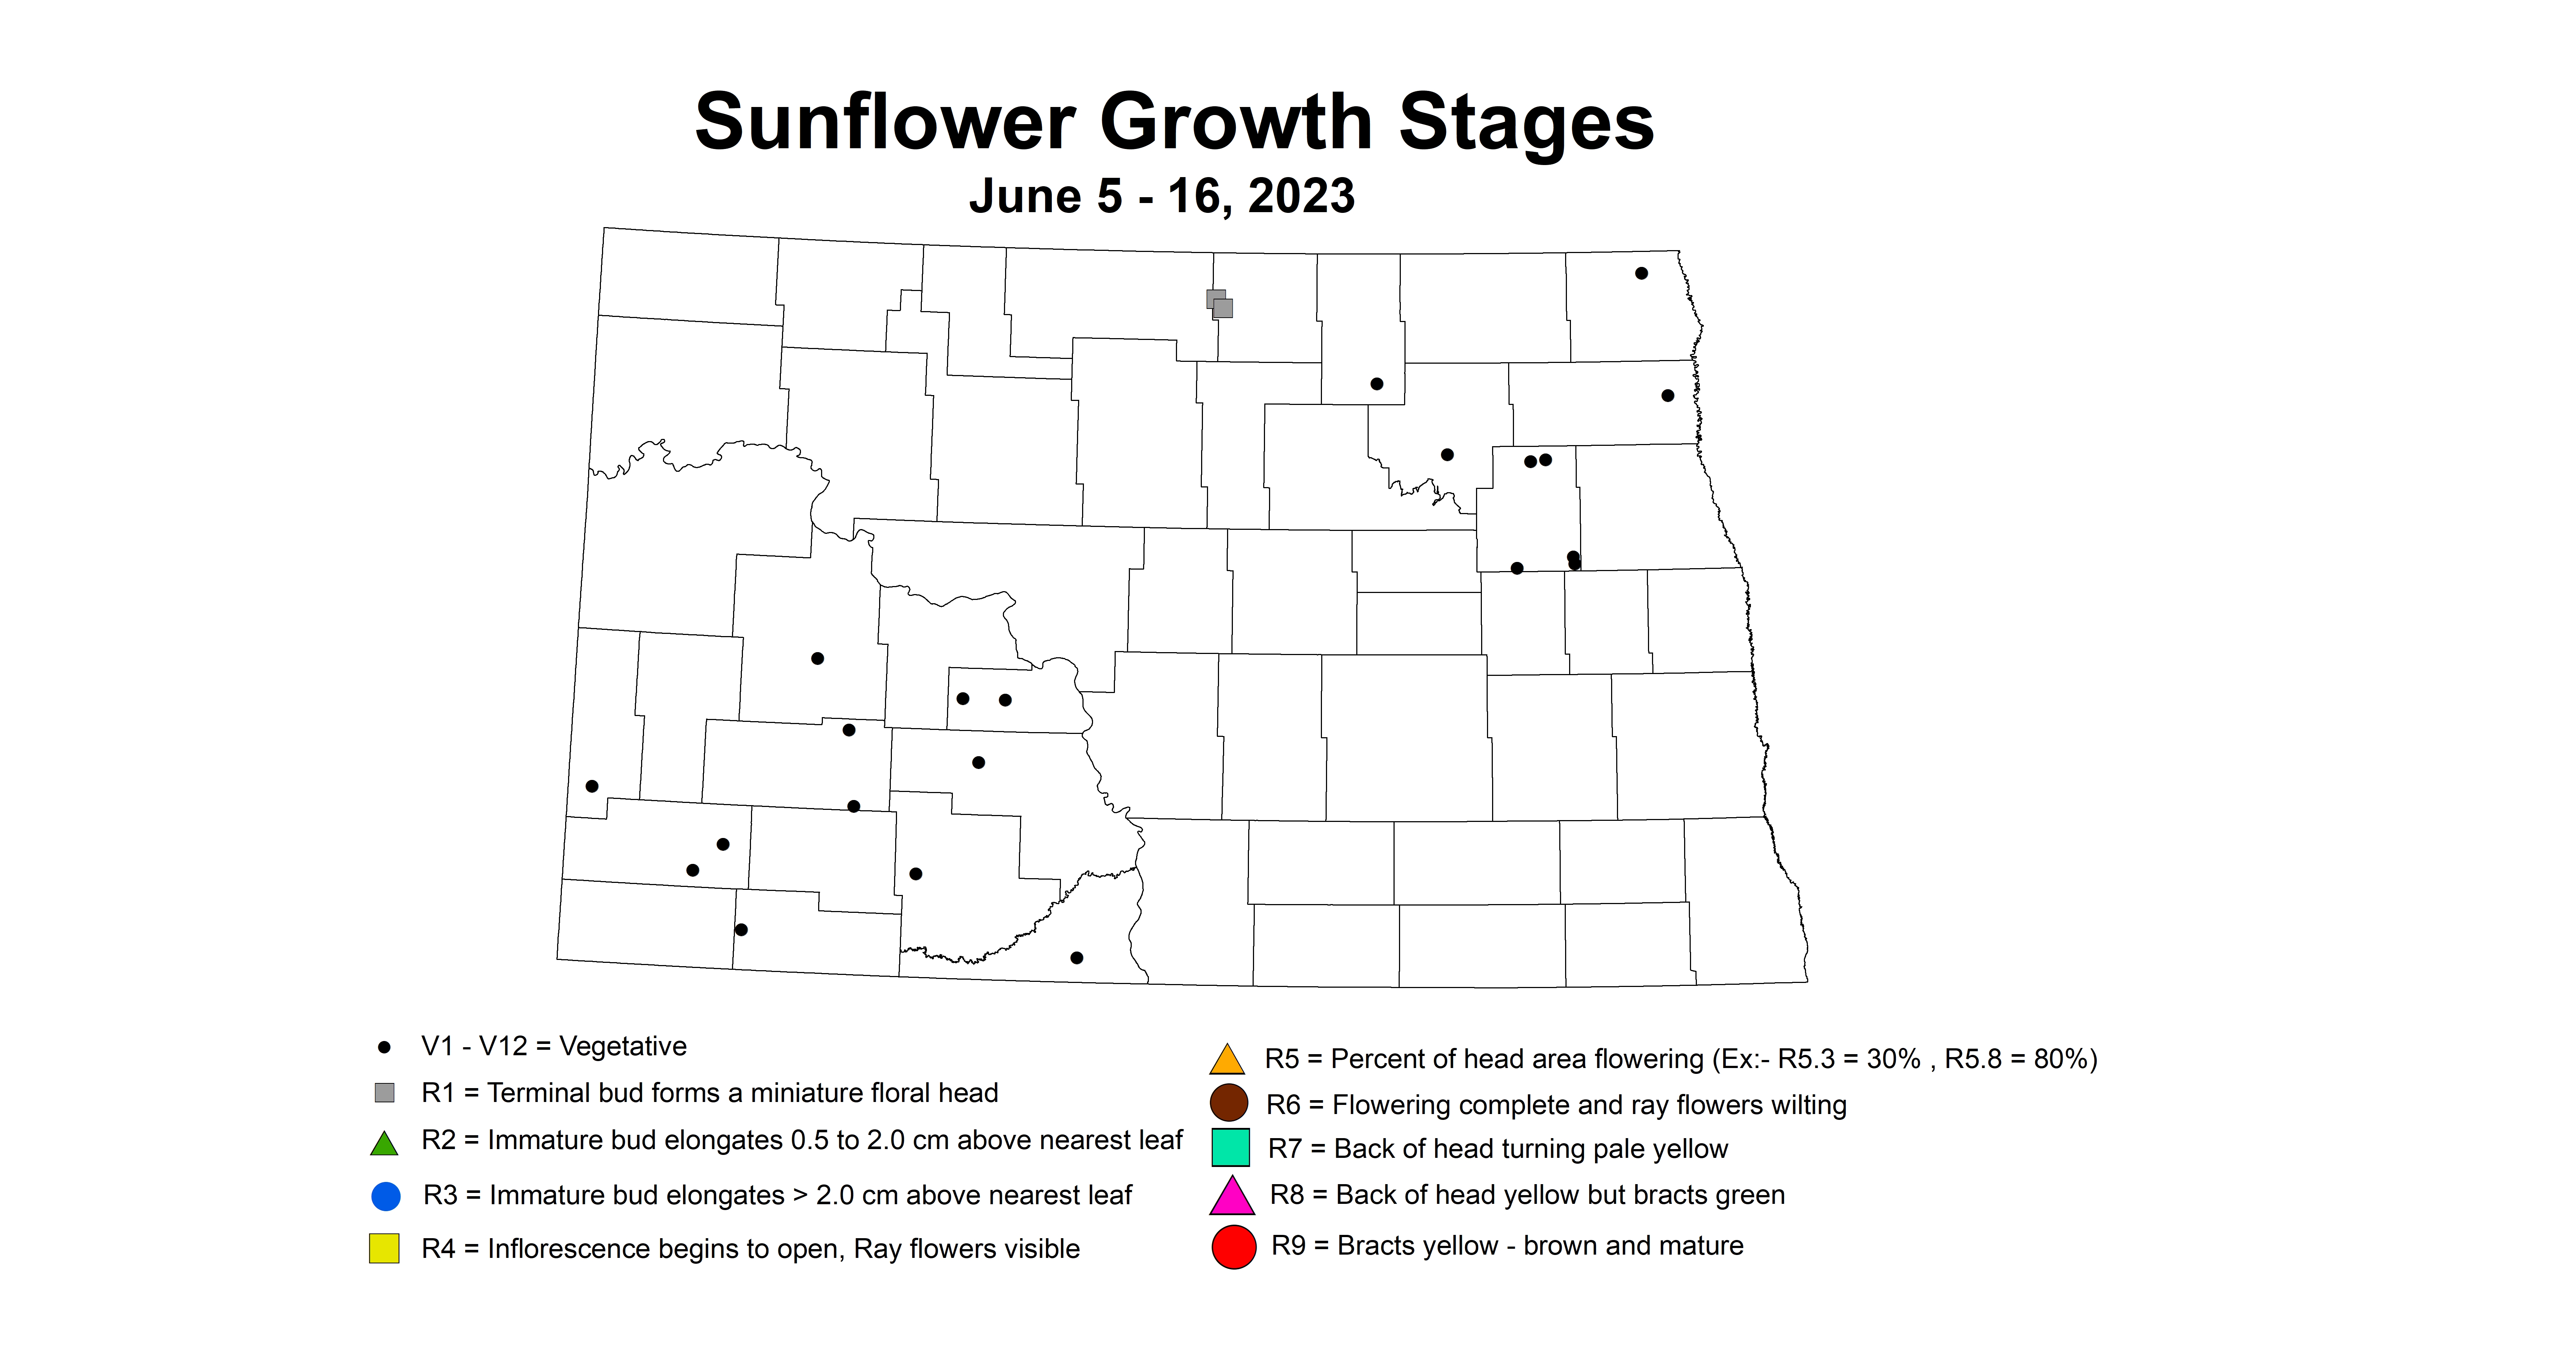 sunflower growth stages June 5-16 2023